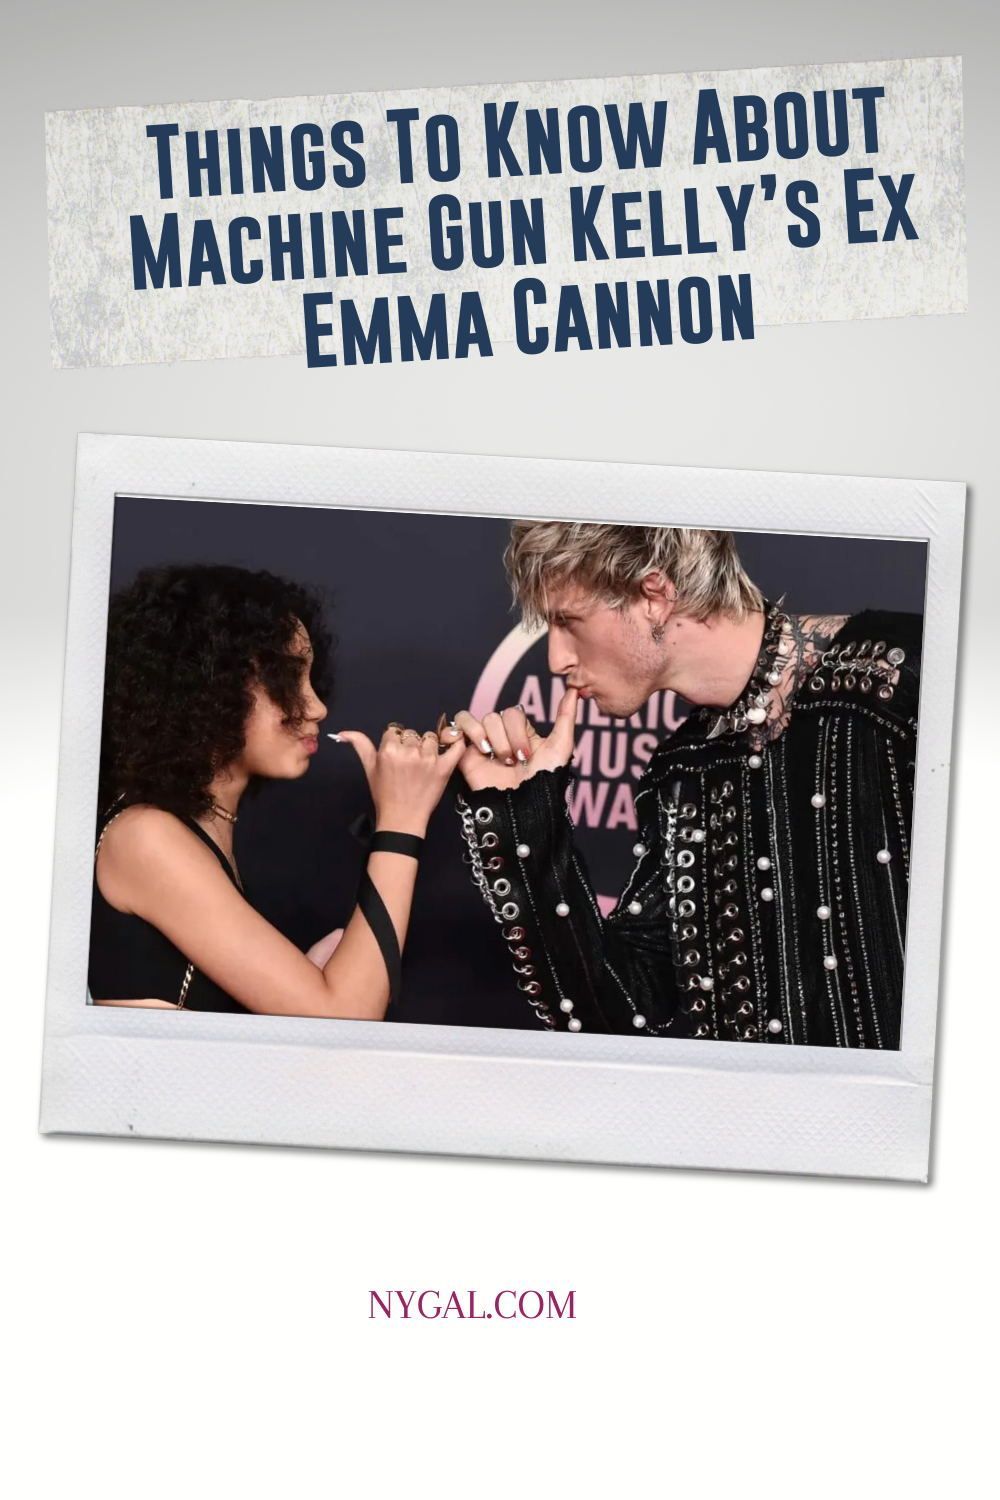 Unknown Facts About Machine Gun Kelly and Emma Cannon